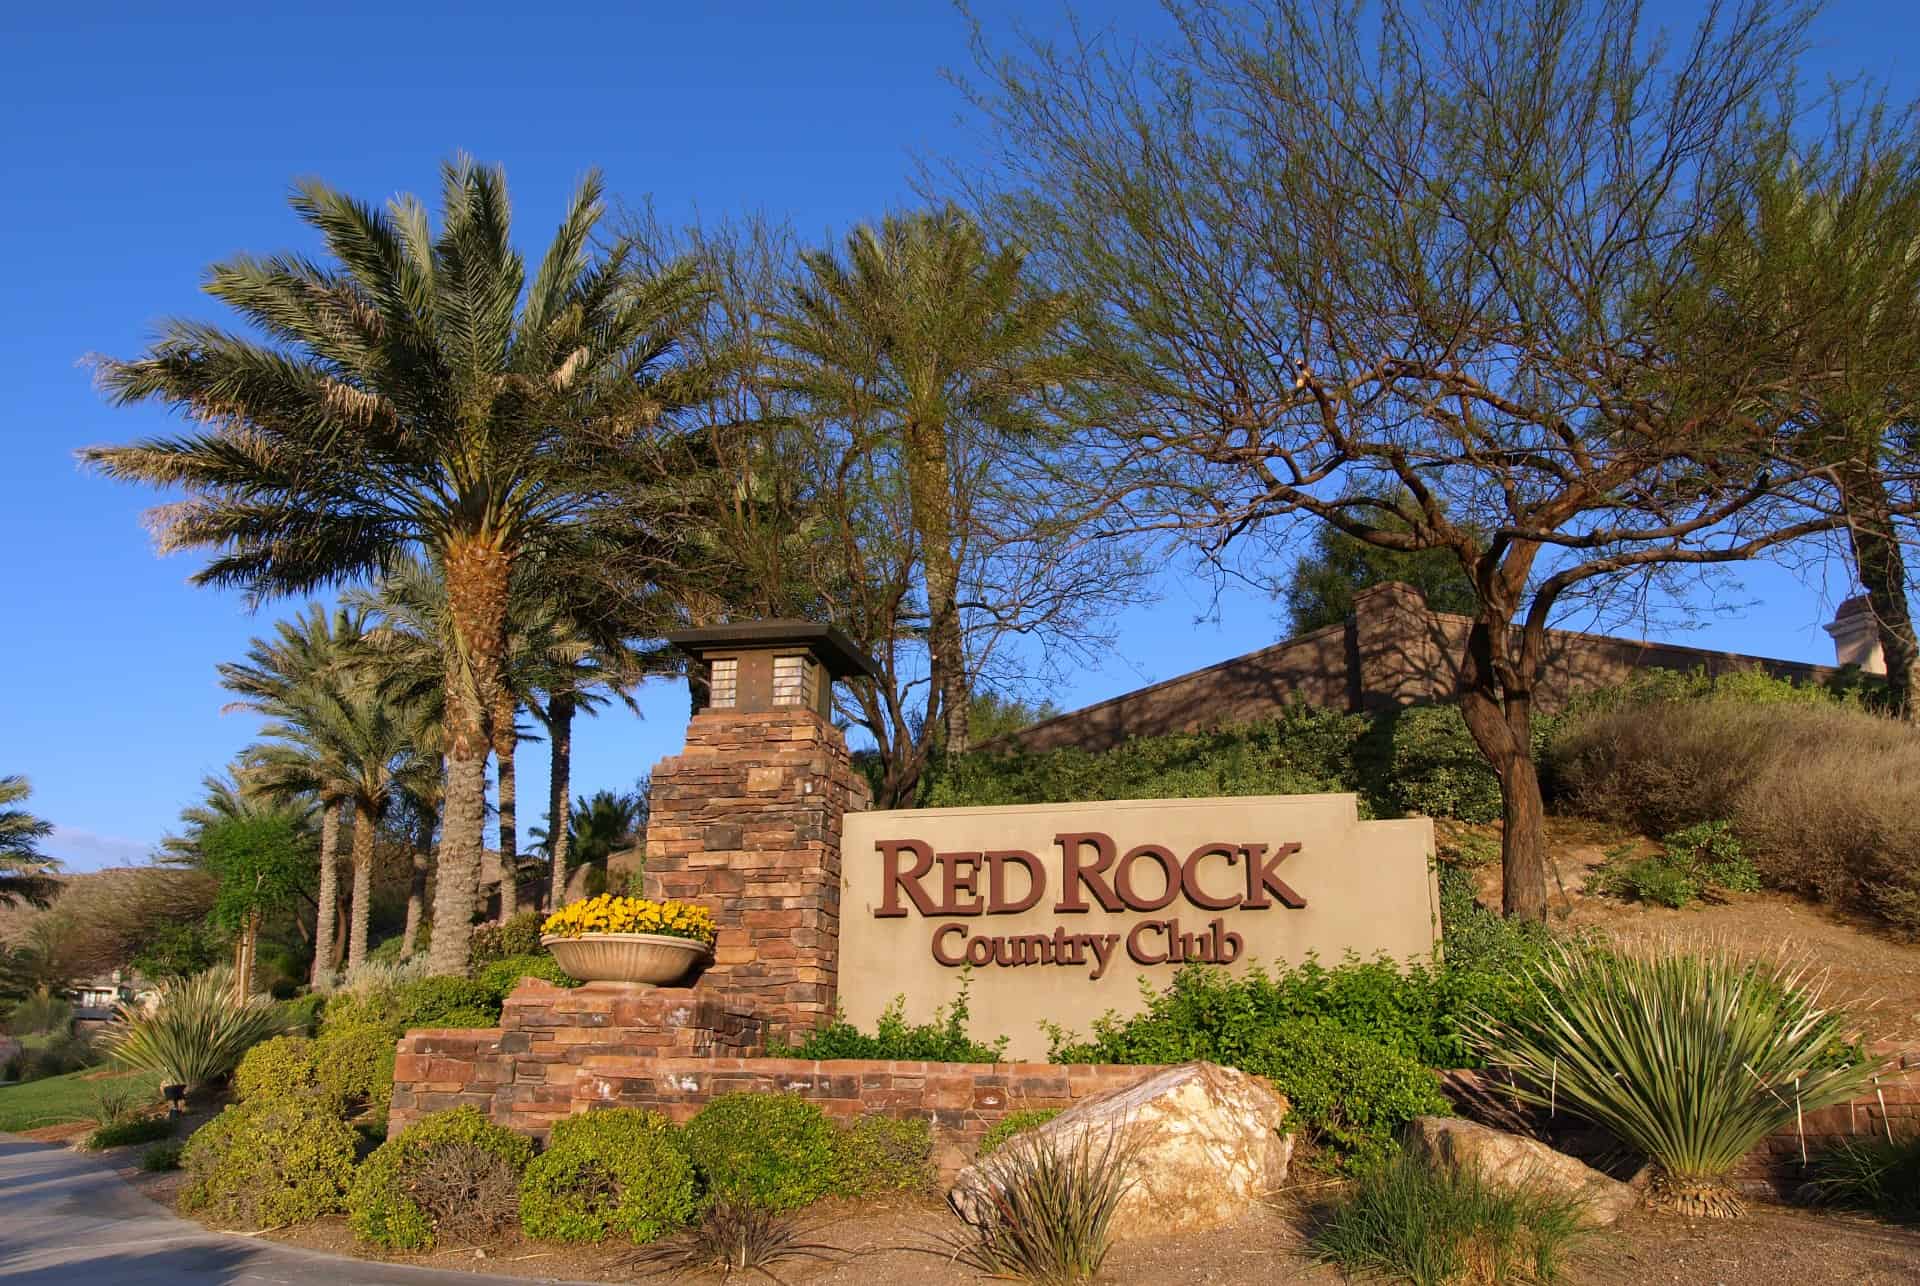 Red Rock country club entrance